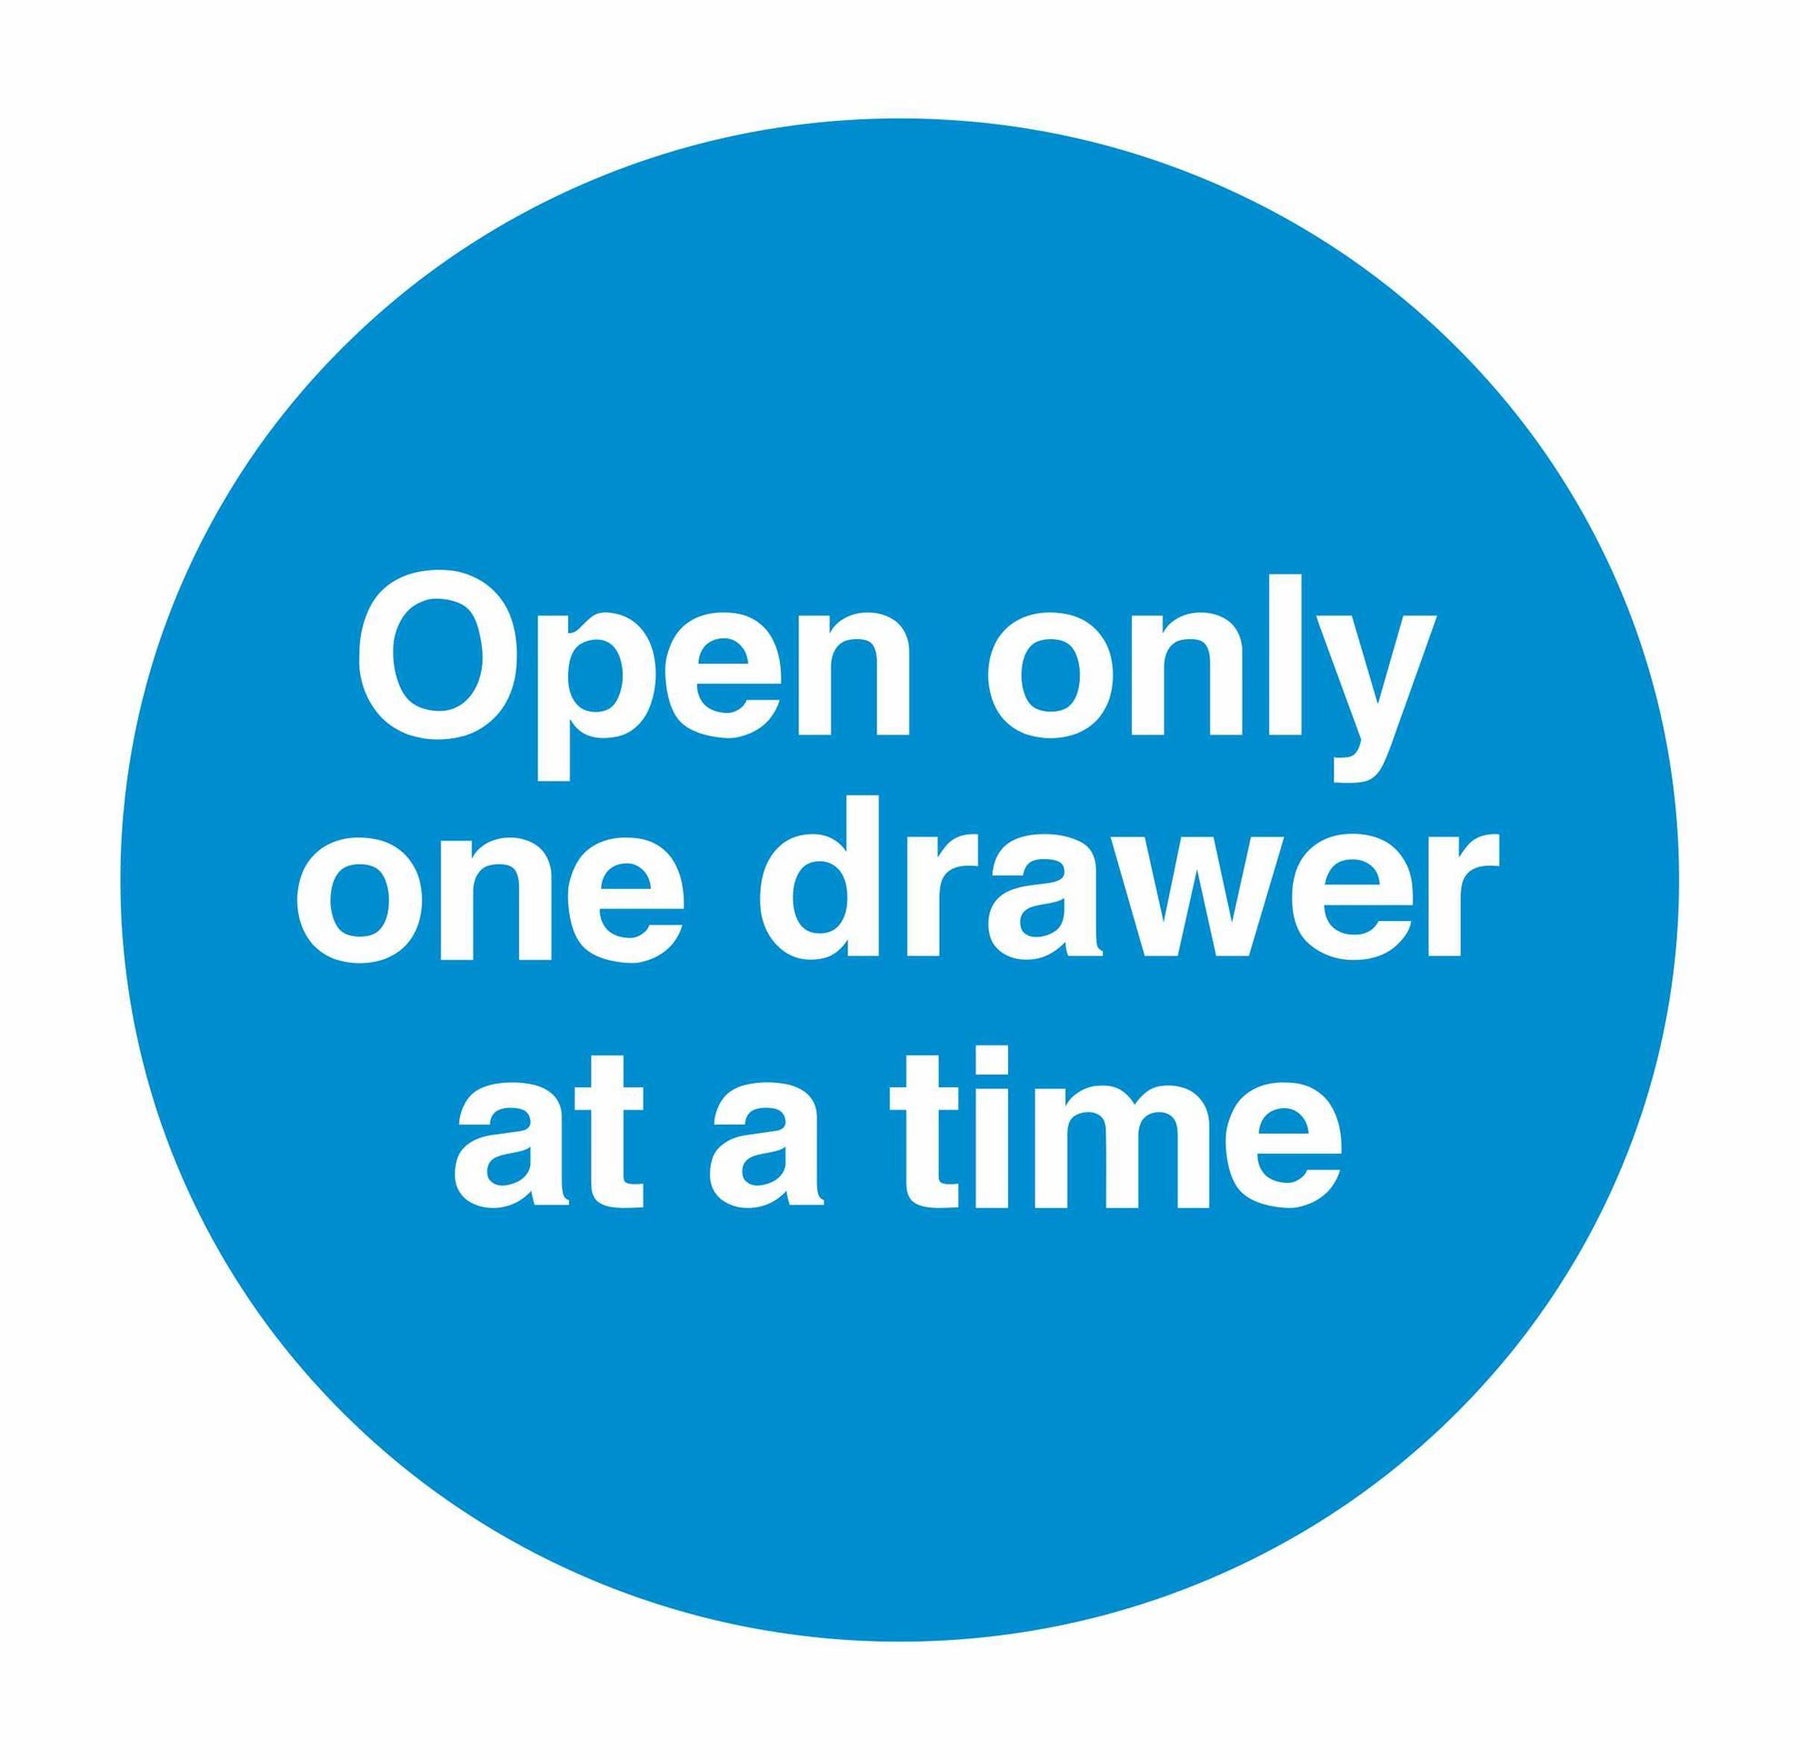 OPEN ONLY ONE DRAWER AT A TIME - SELF ADHESIVE STICKER